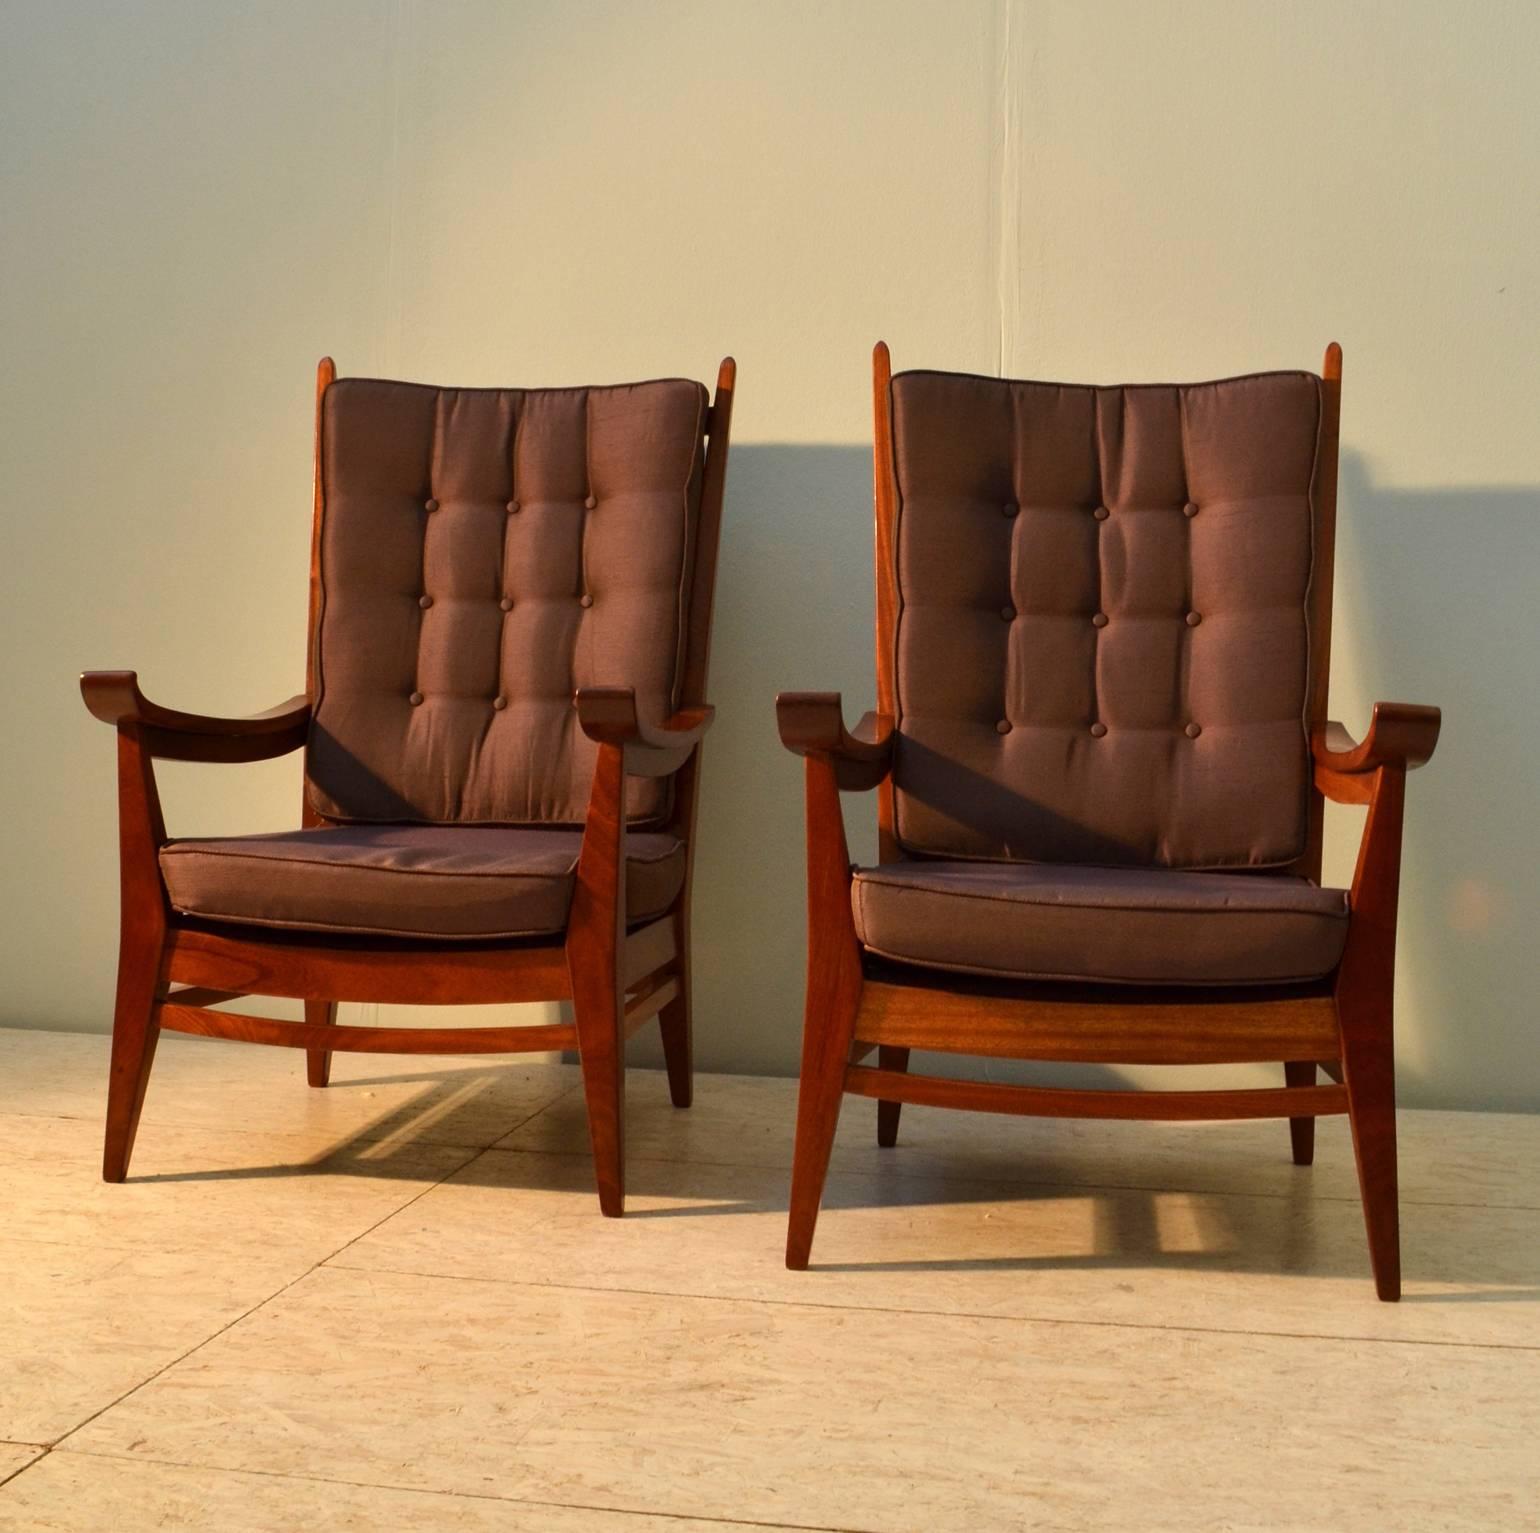 Mahogany framed handcrafted high back slatted chairs with real character. The button cushioned seats and backs are re upholstered in a warm tone high quality silk that matches well with the orange brown wood. The throne like chairs arm rests curve